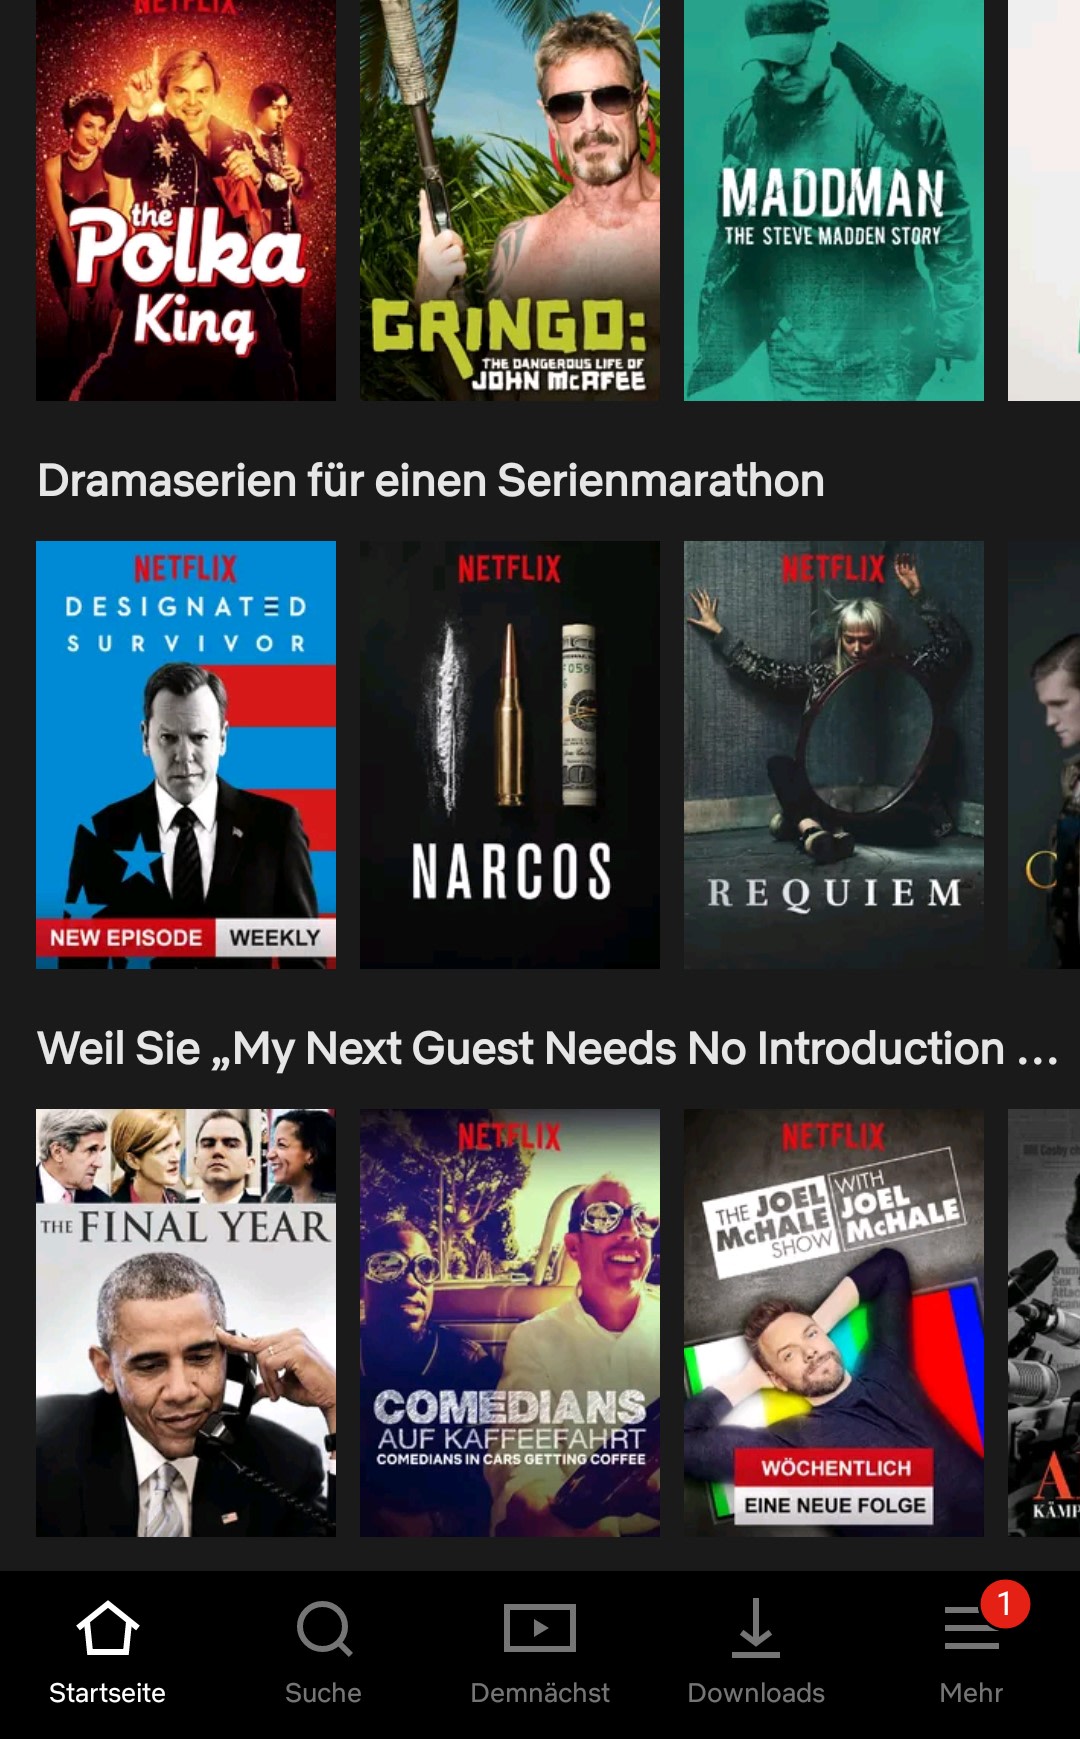 mobile app personalization example netflix